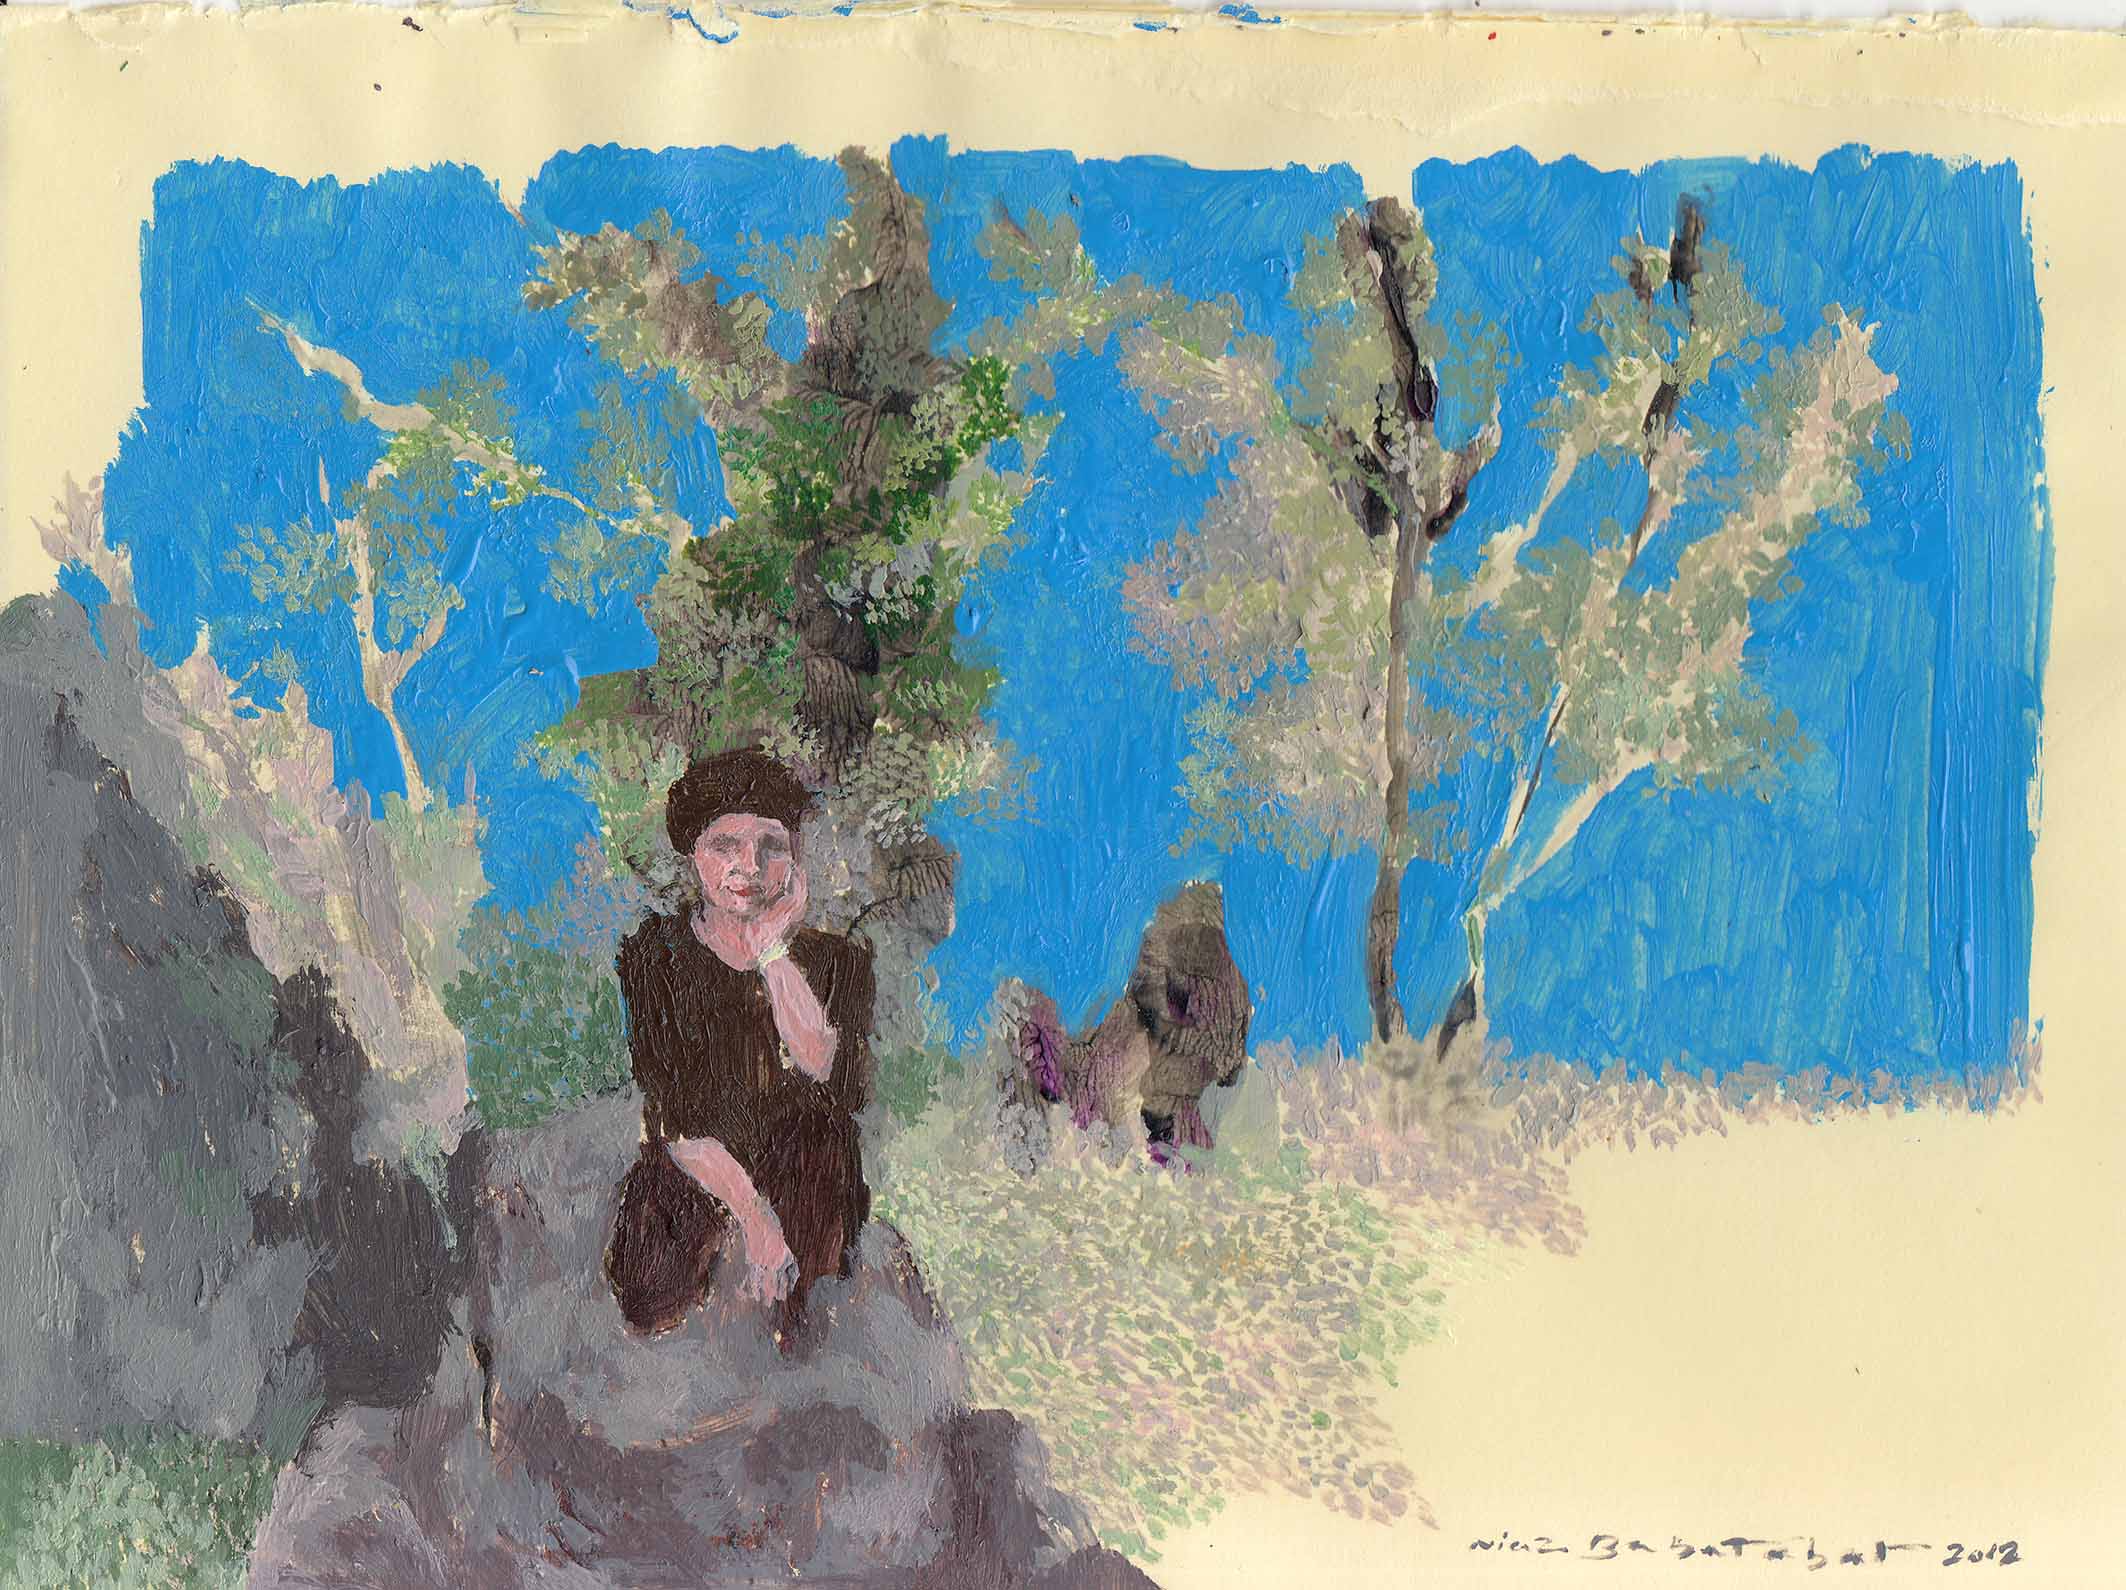 Niaz Babatabar , After the trip , 2013 ,  Acrylic On Paper , 16 x 12 Cm